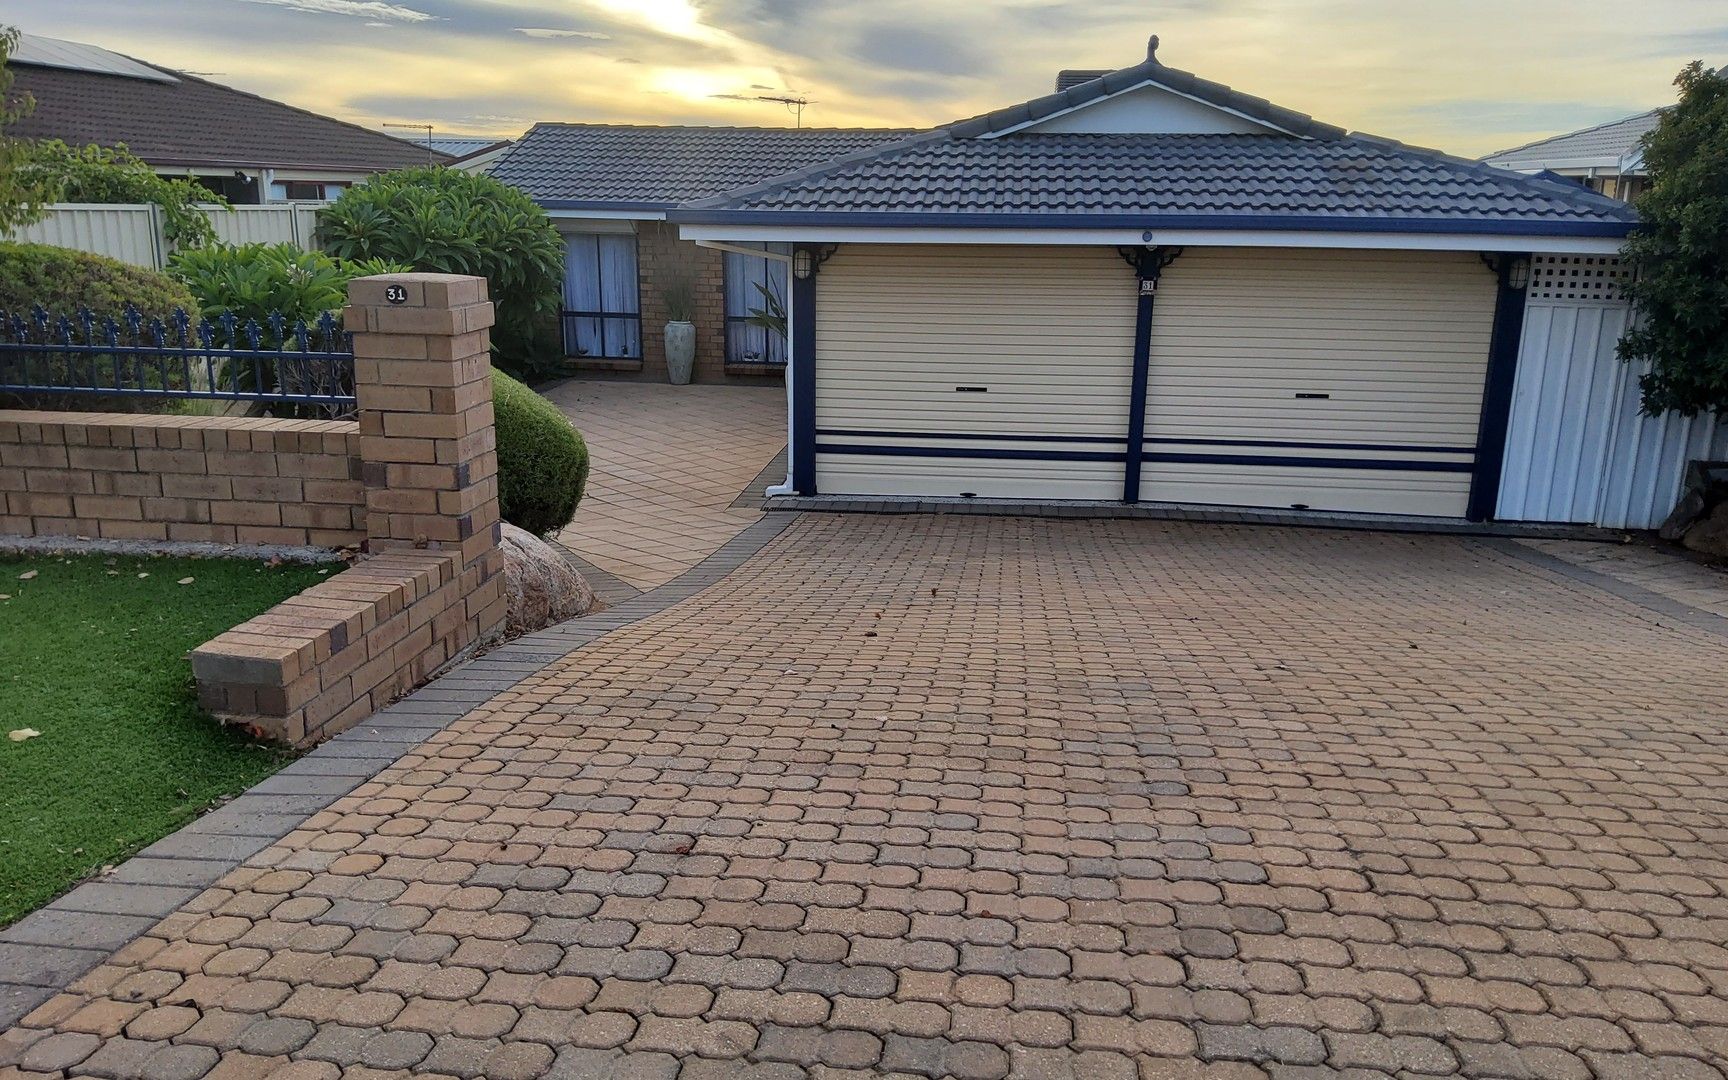 3 bedrooms House in 31 Baldwin Court WYNN VALE SA, 5127